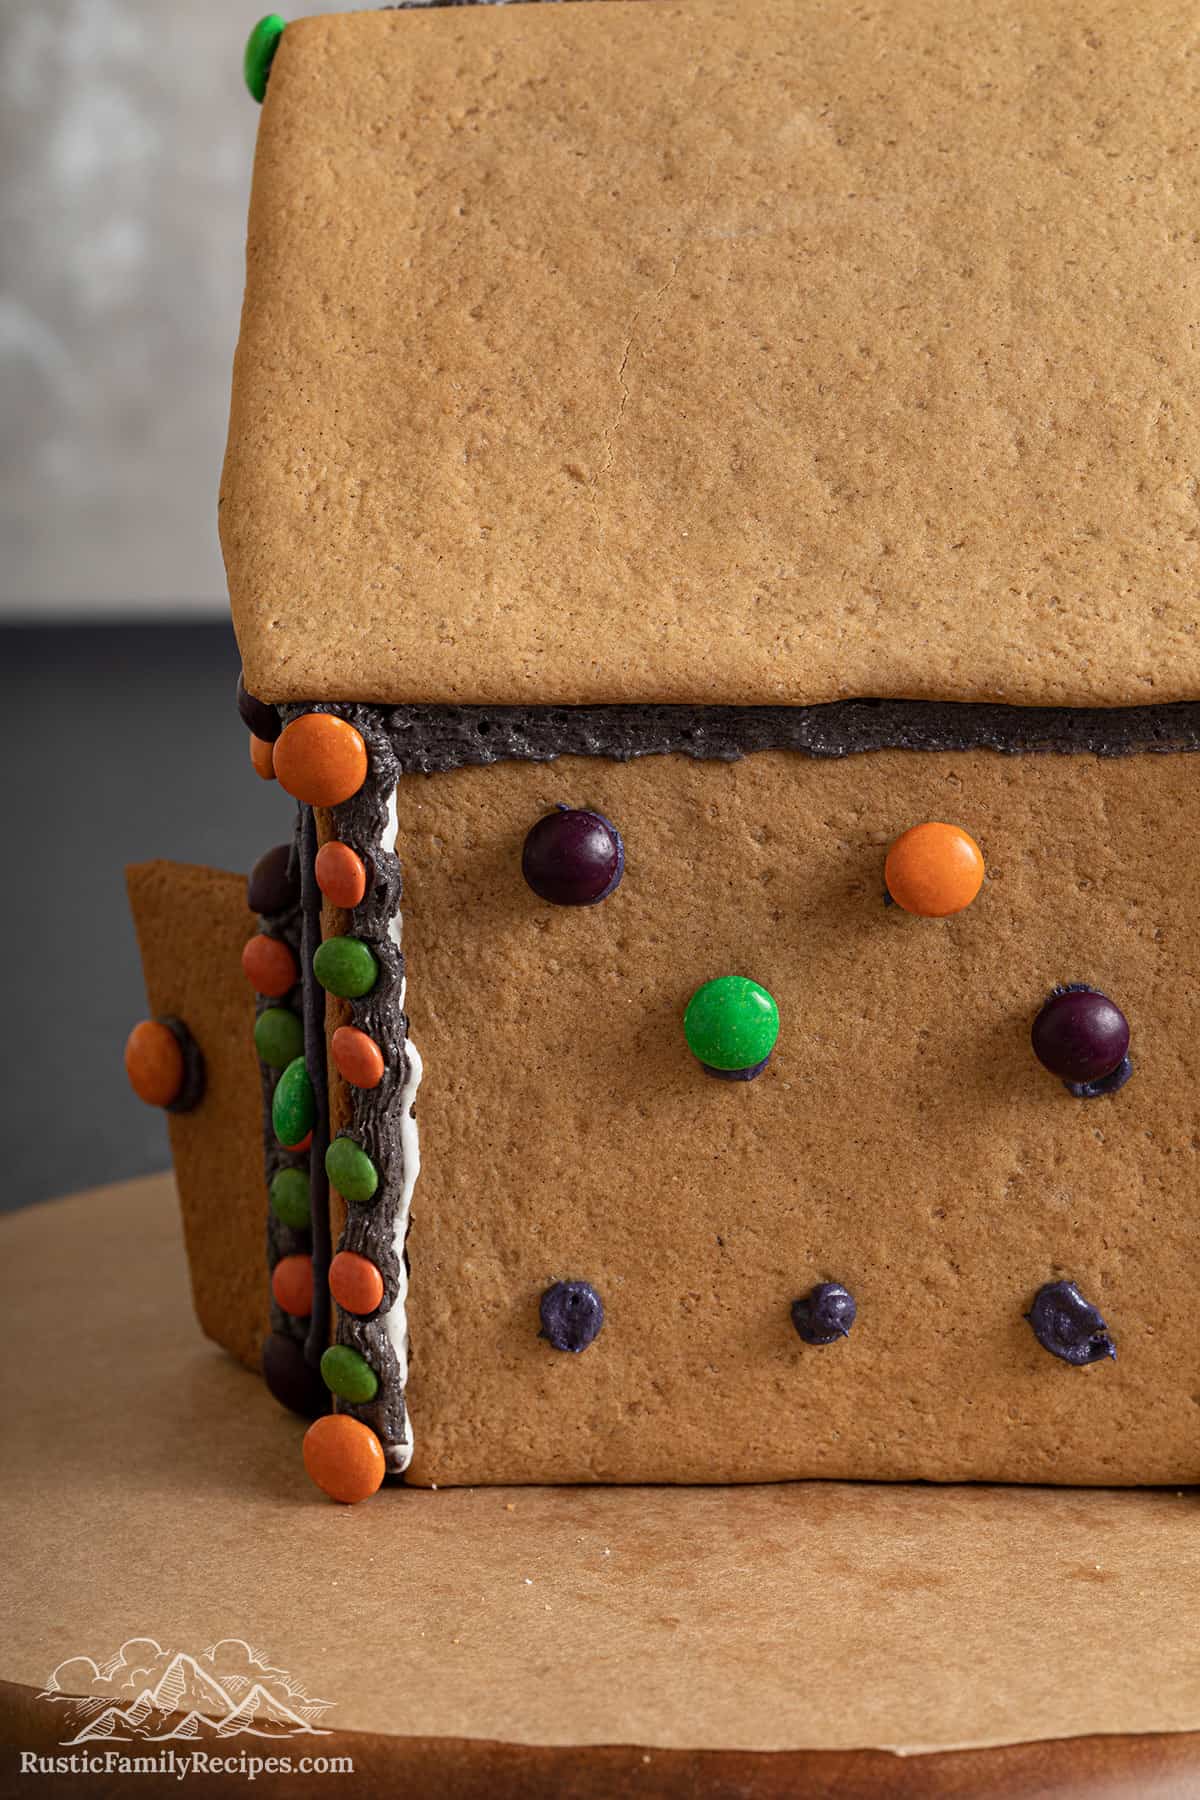 Gluing mini M&M's to the gingerbread house.